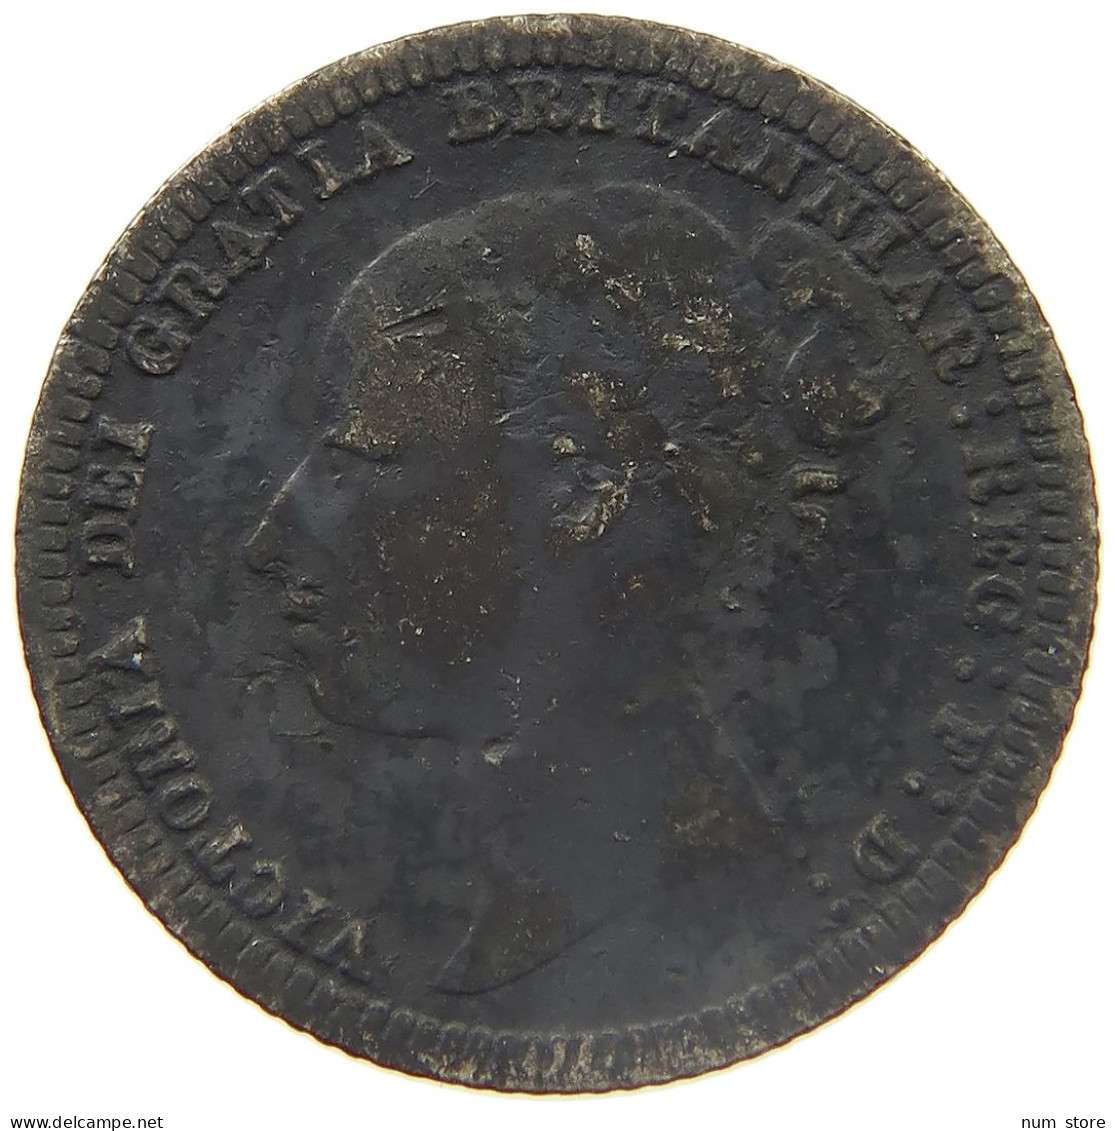 GREAT BRITAIN SIXPENCE 1880 VICTORIA 1837-1901 #MA 022959 - H. 6 Pence